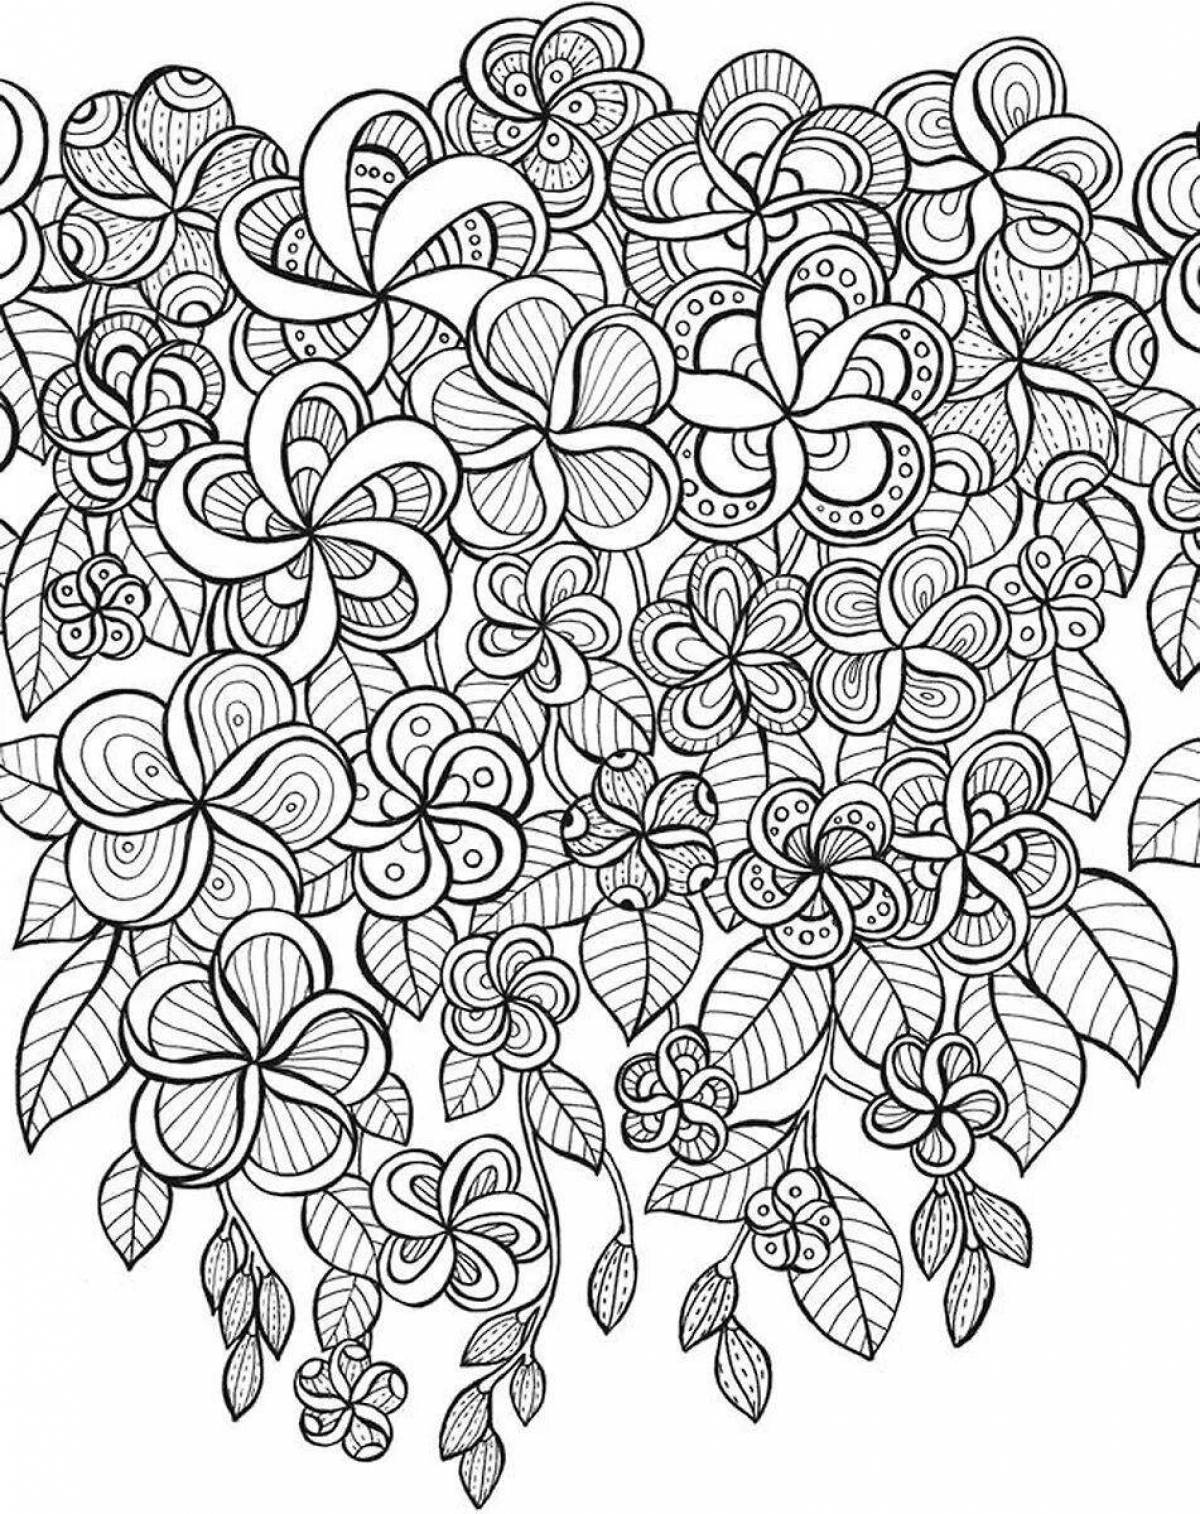 Gorgeous intricate flower coloring book